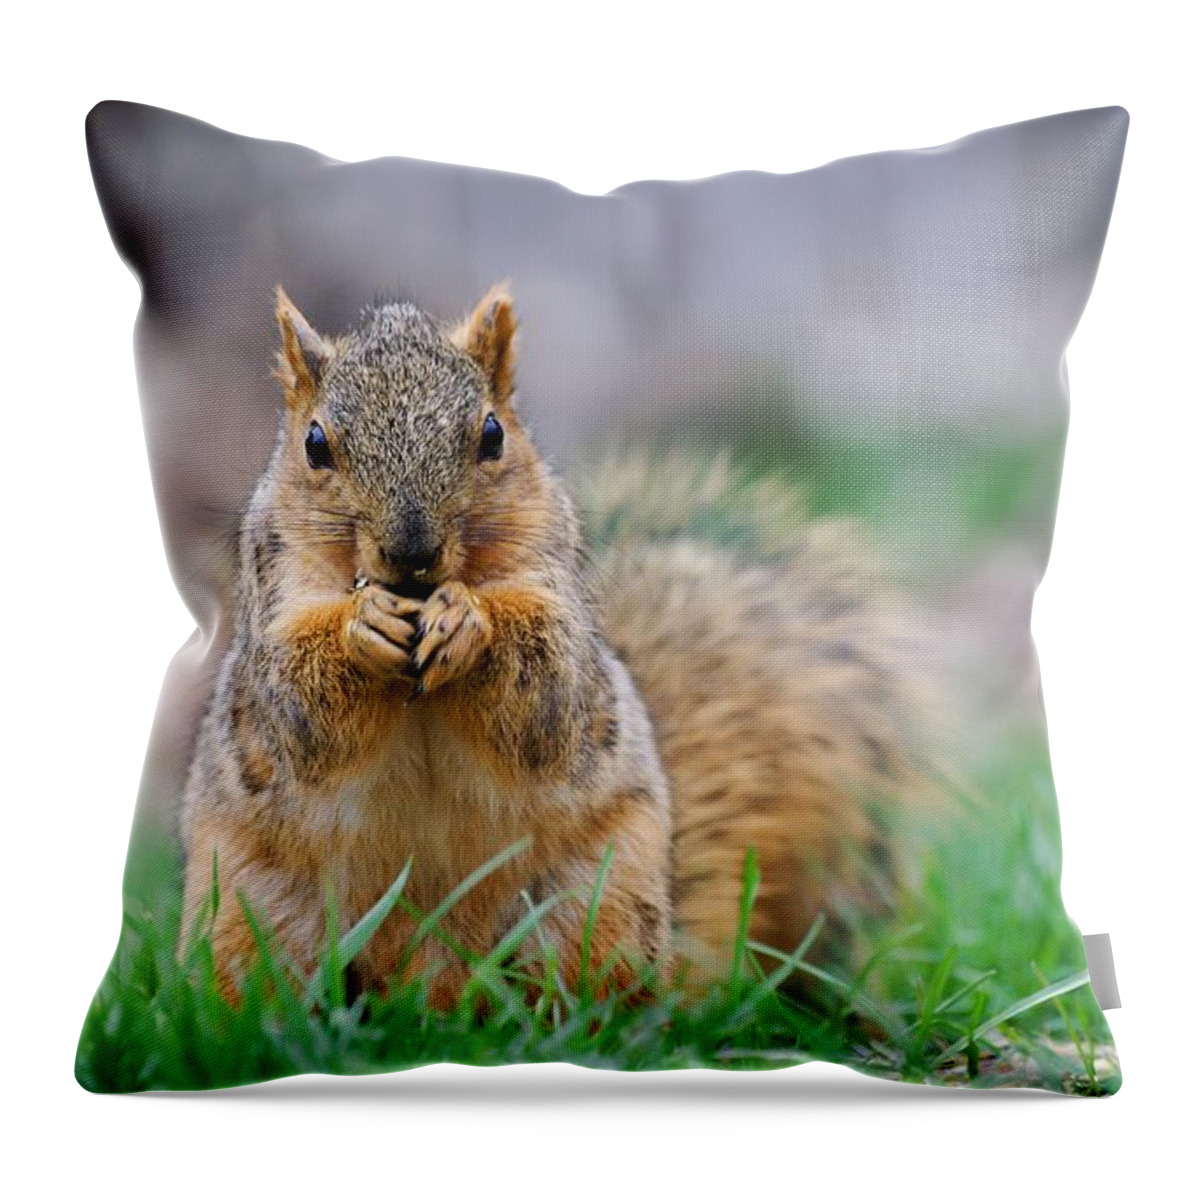 Fox Squirrel Throw Pillow featuring the photograph Super Cute Fox Squirrel by Don Northup